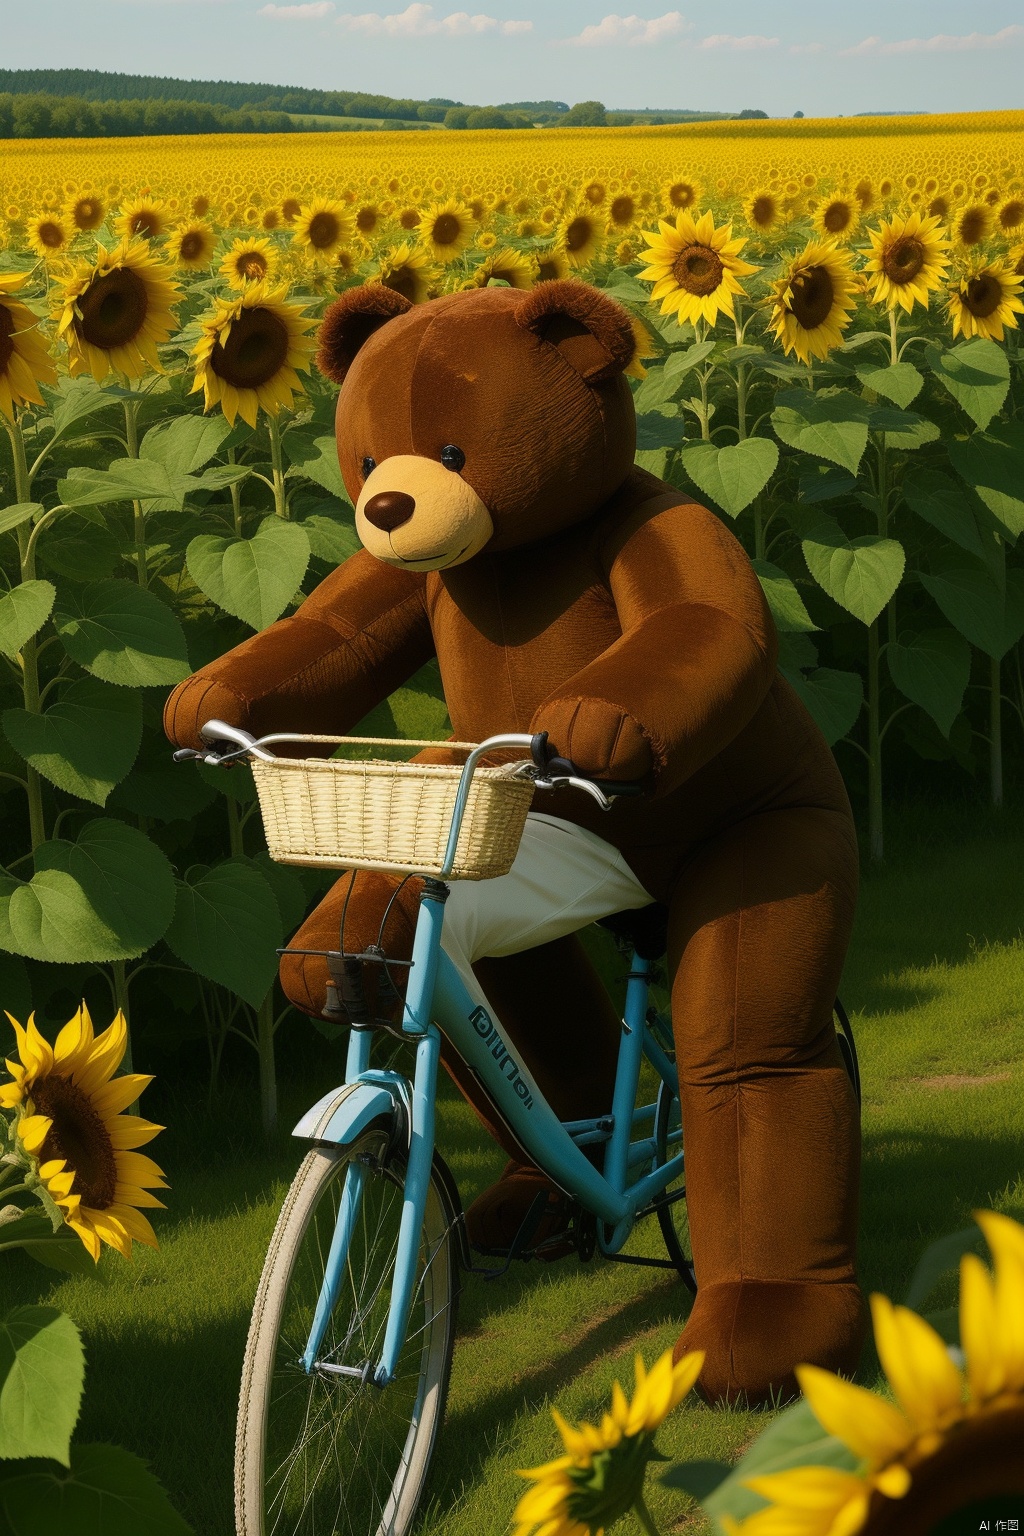 Hyperdetailed Photography,ï»¿A giant teddy bear riding a bicycle through a field of sunflowers.